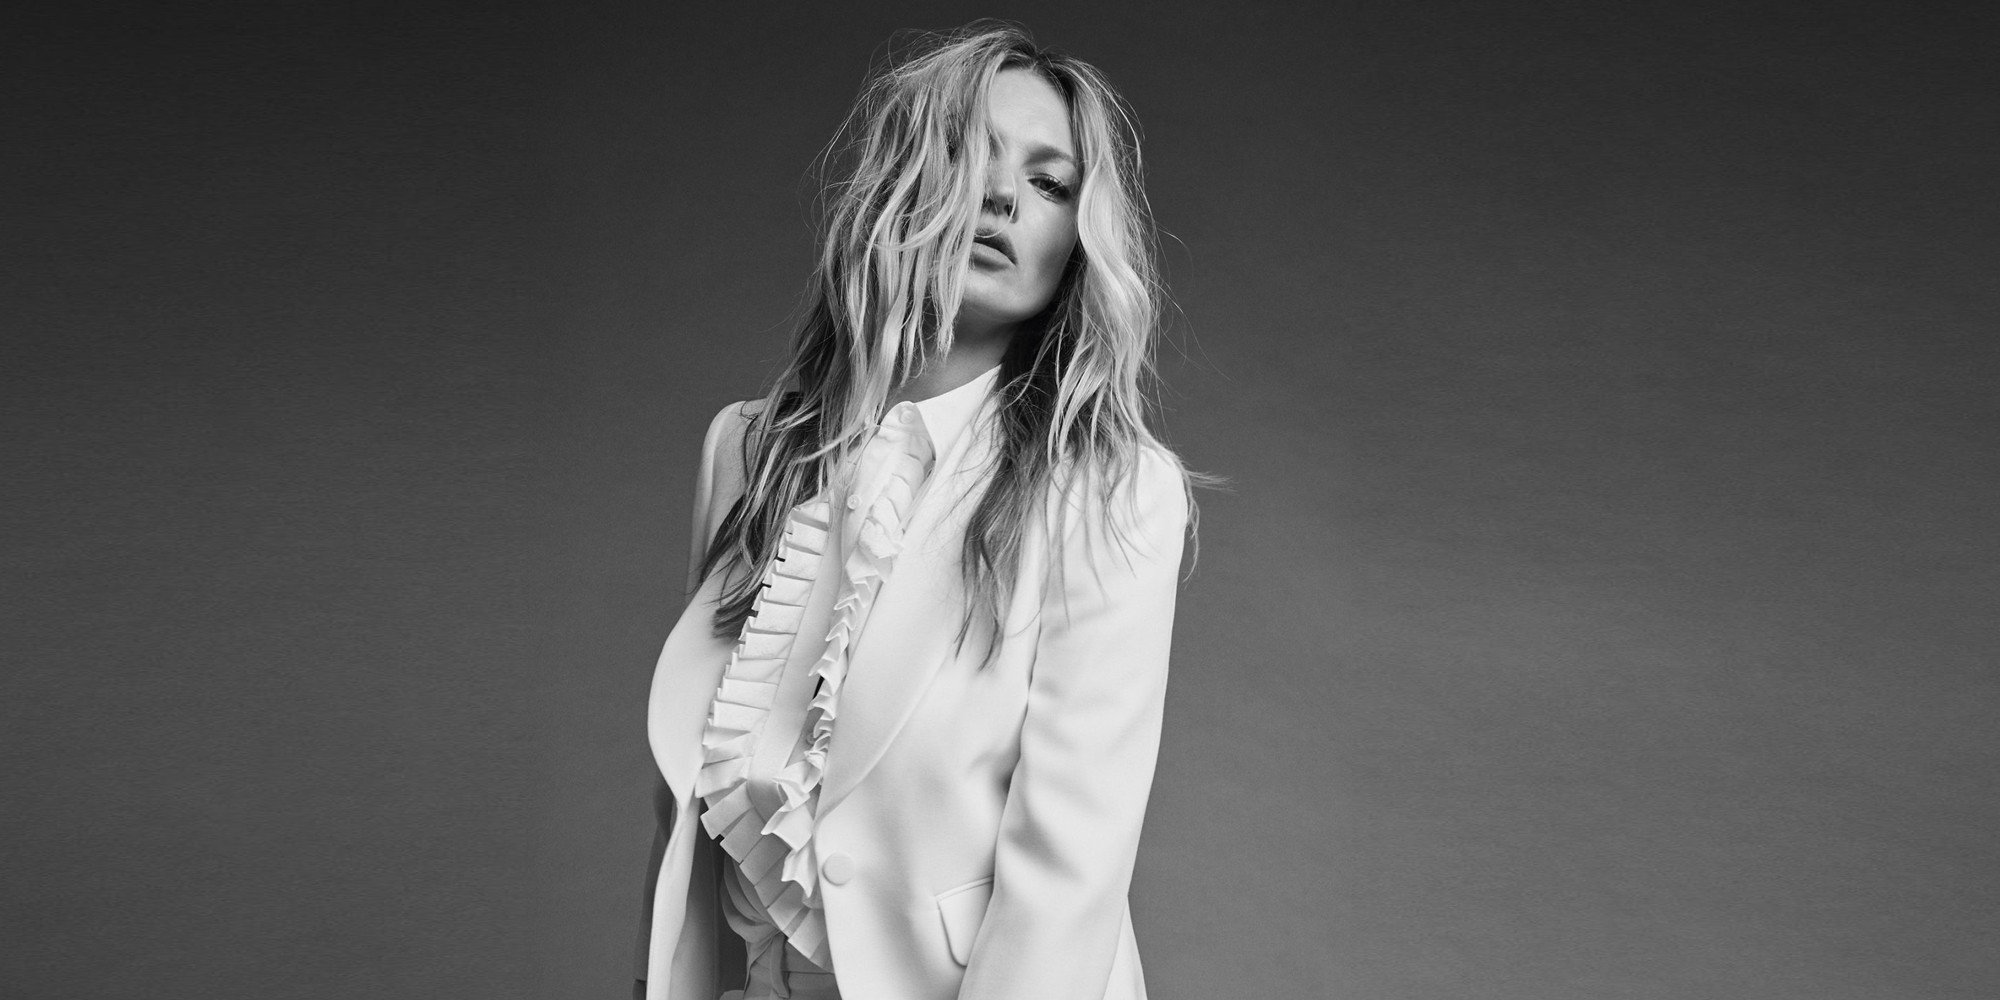 ZADIG & VOLTAIRE SPRING 2020 CAMPAIGN FILM STARRING KATE MOSS